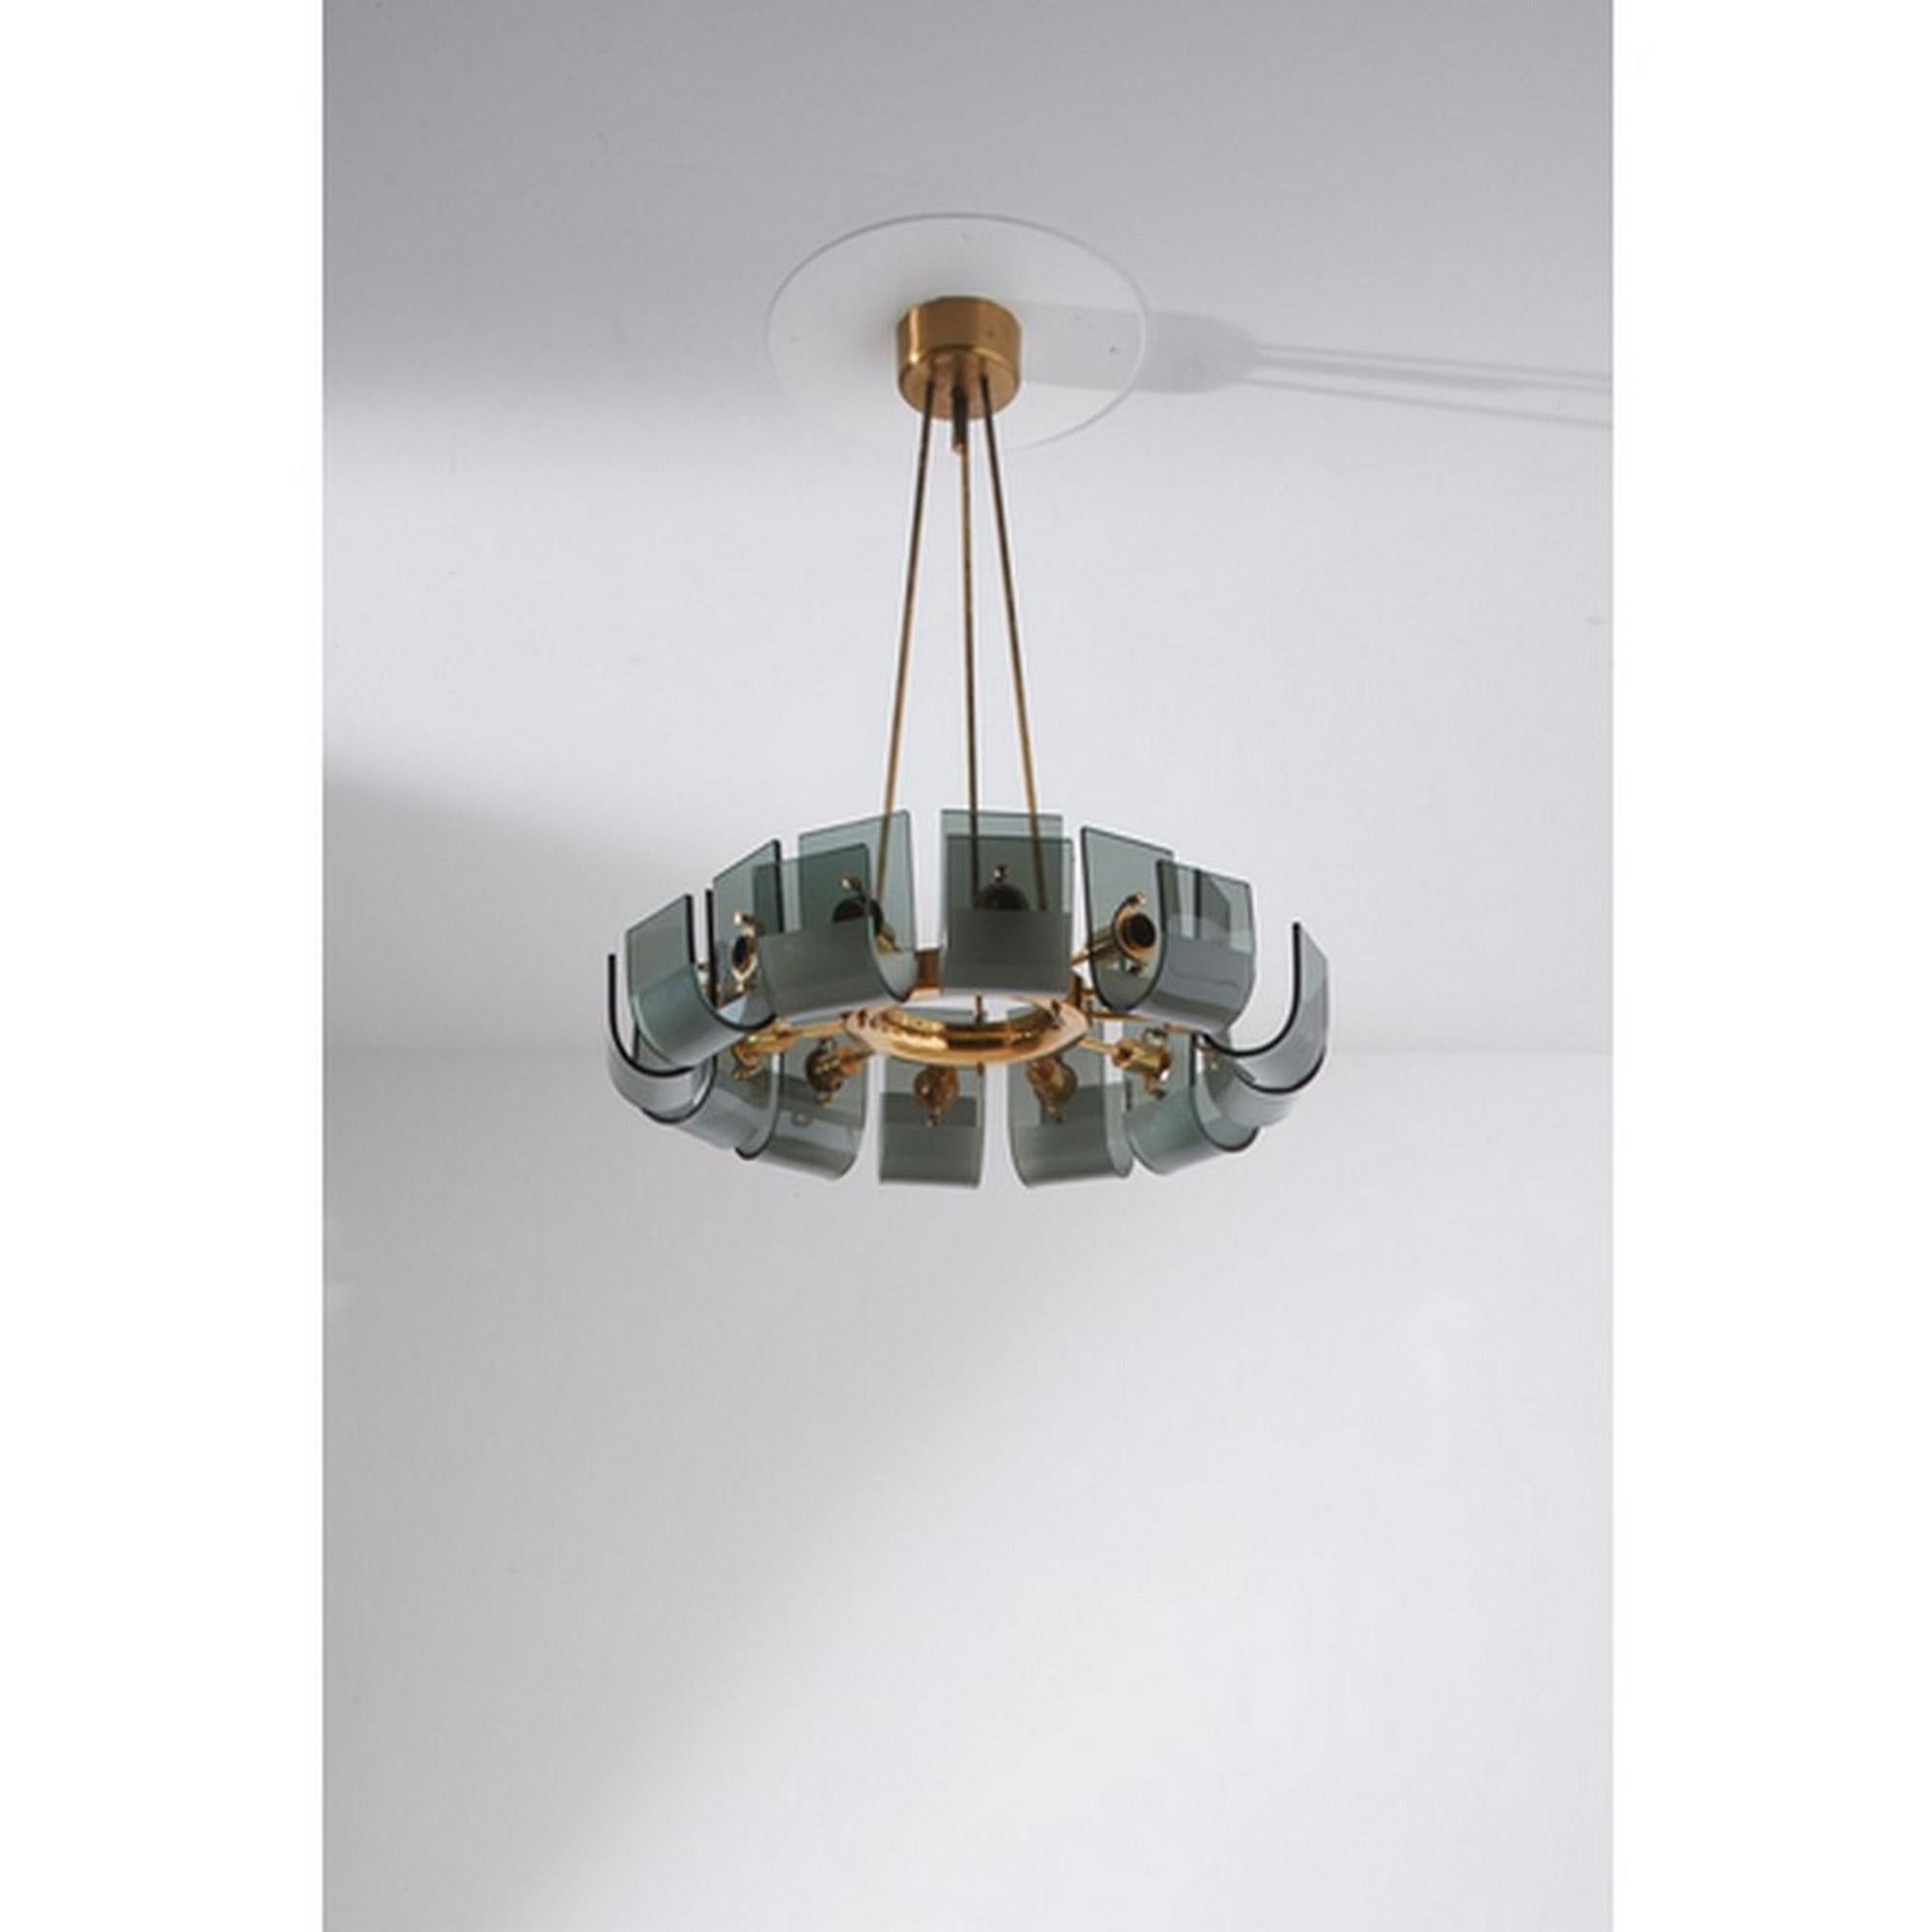 Italian Mid-Century Modern Curved Glass and Brass Ceiling Lamp by Gino Paroldo